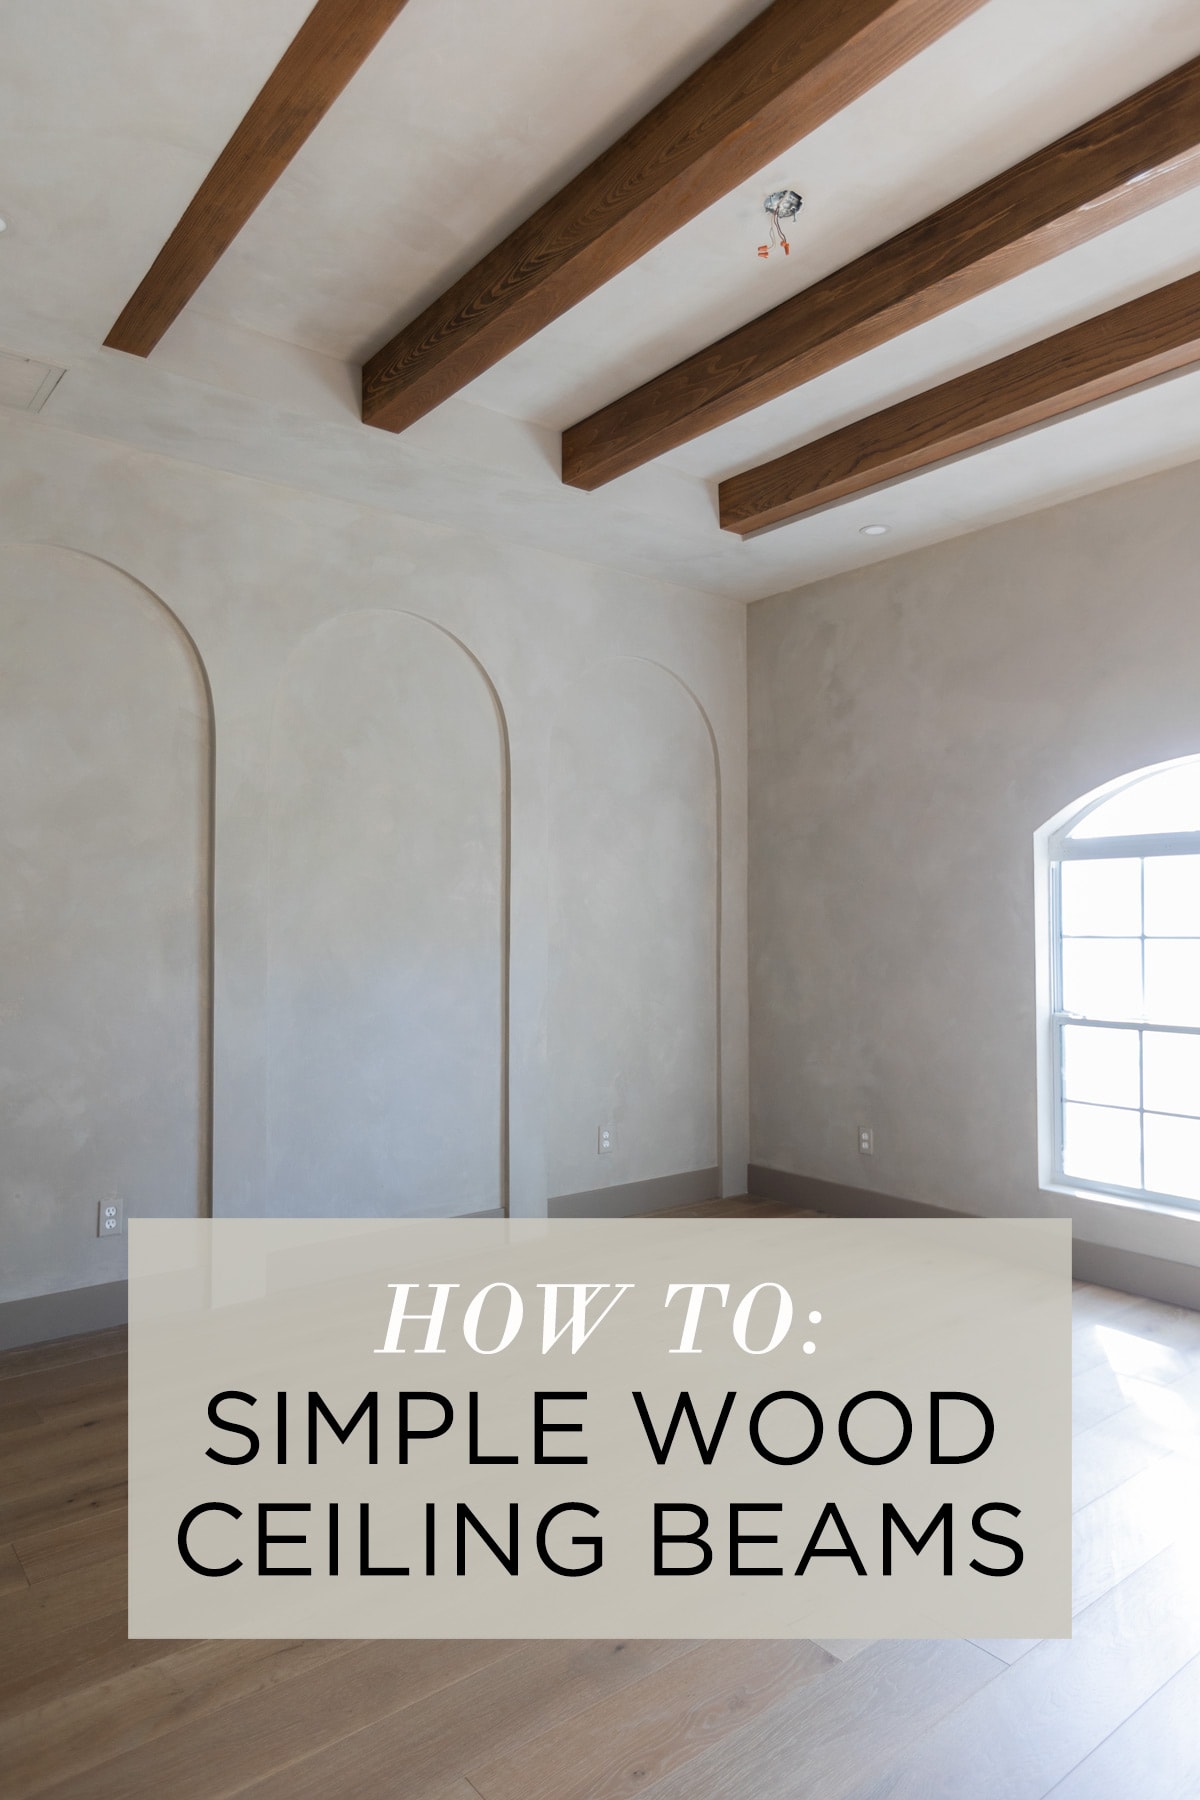 HOW TO: DIY A Wood Slat Ceiling That Will Leave You and Your Guests in Awe  - Venture Into The Woods